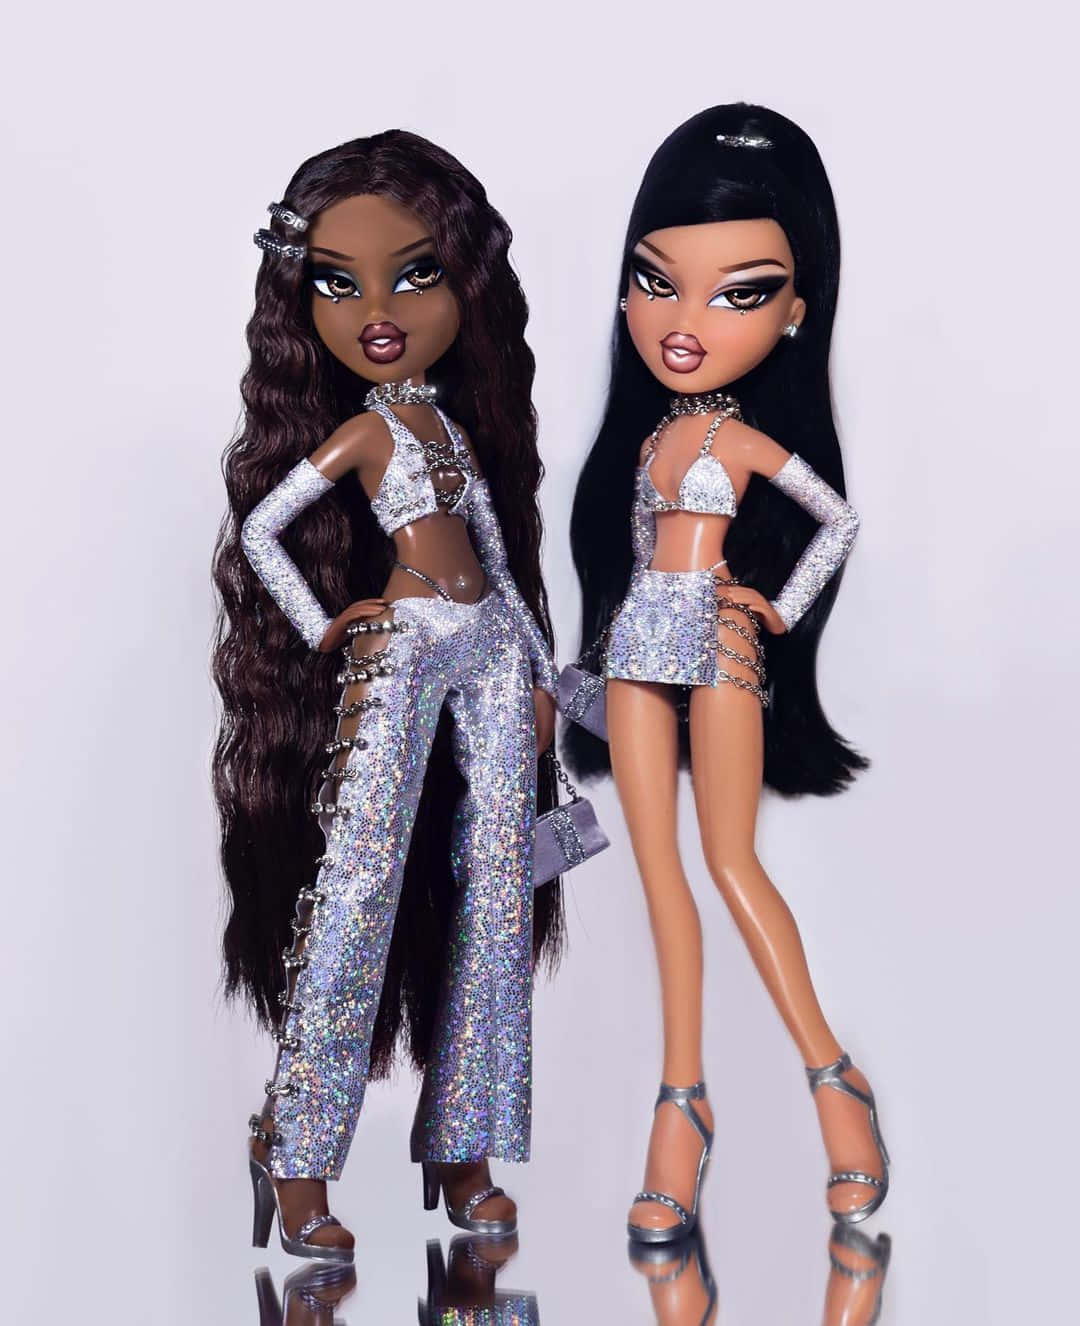 Two Dolls In Silver Outfits Standing Next To Each Other